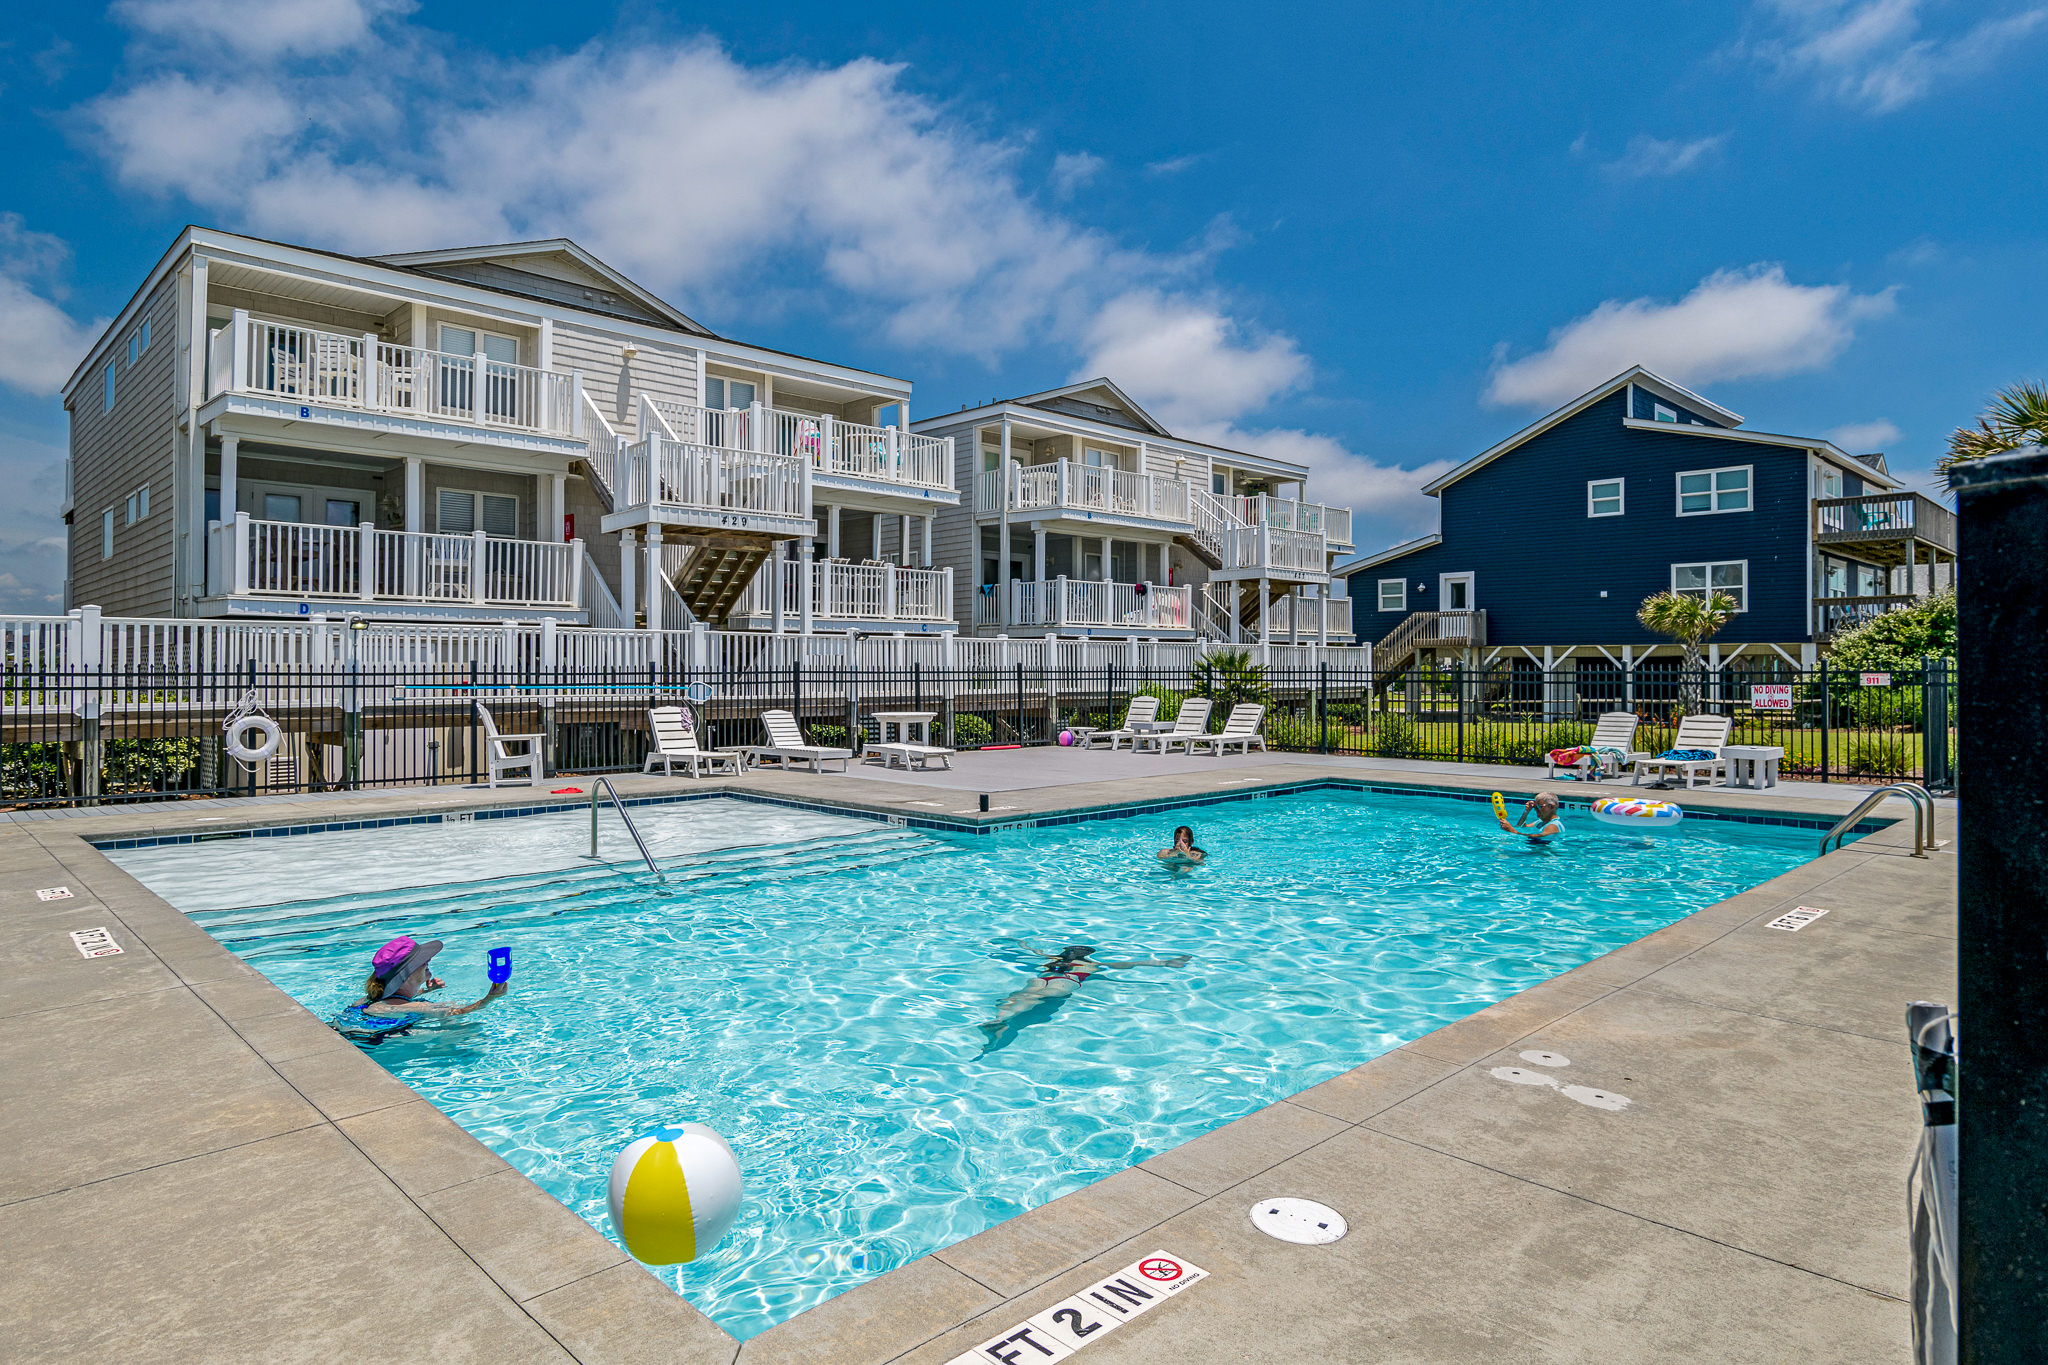 Water's Edge in Holden Beach vacation rentals Private Swimming Pool